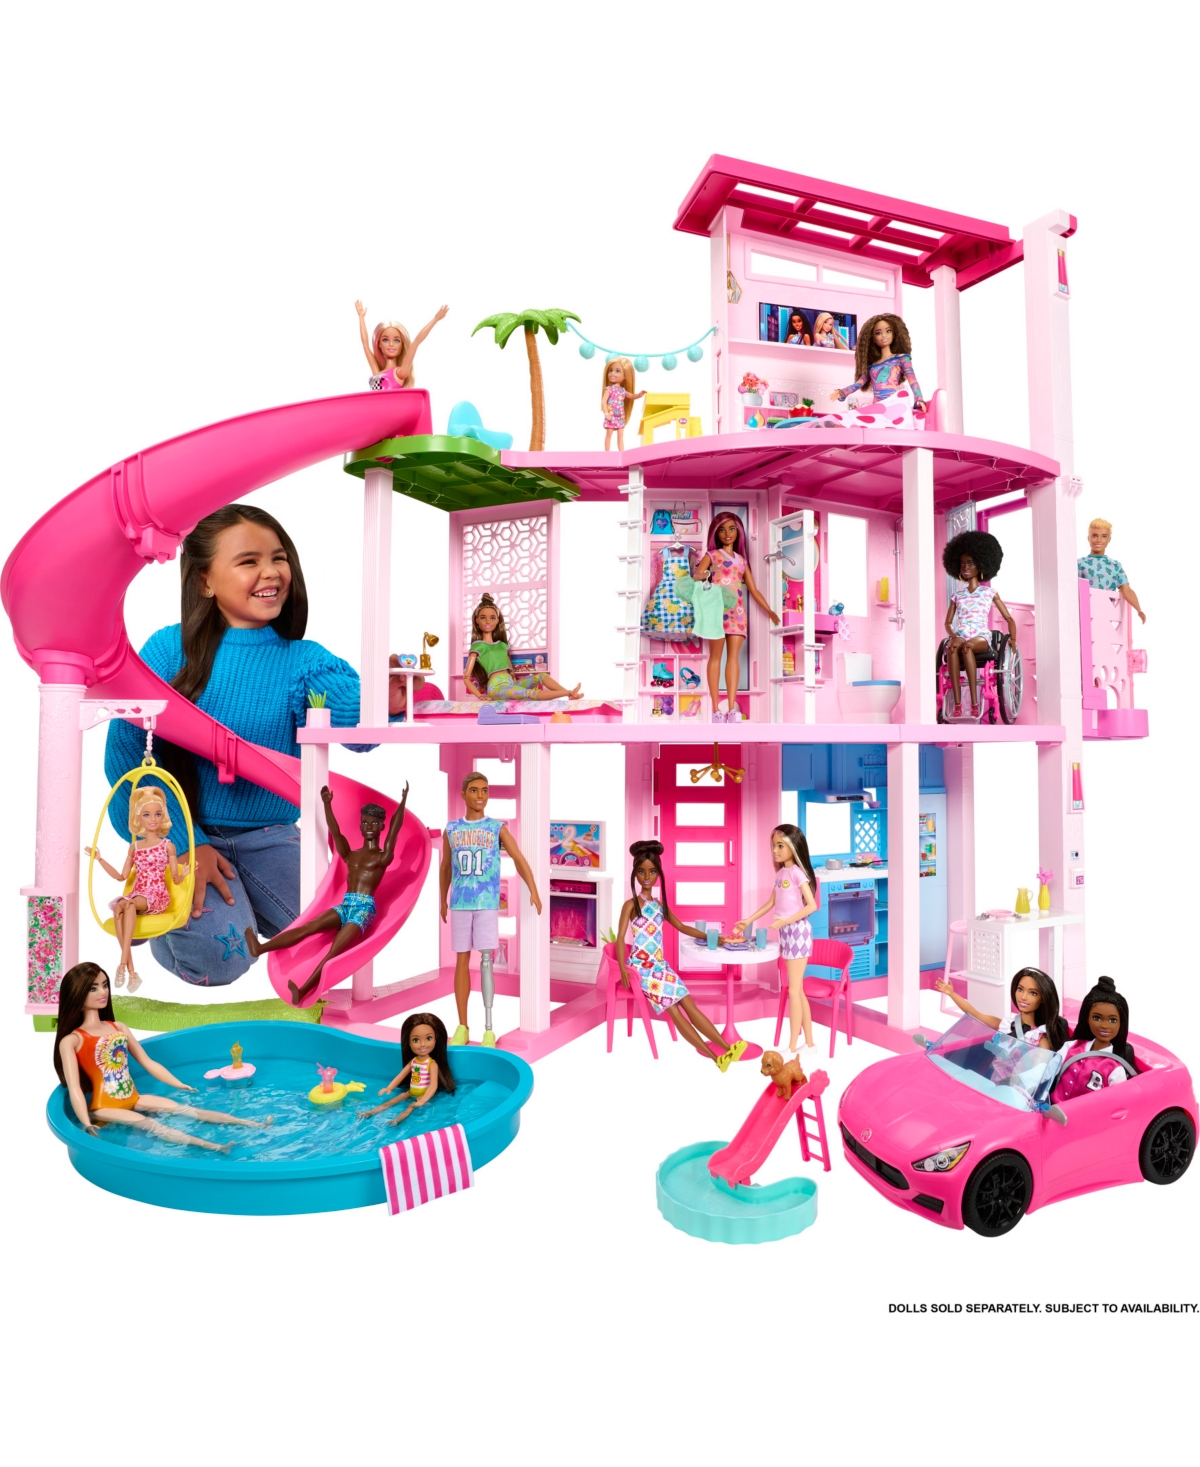 Barbie Kids' Dreamhouse, 75+ Pieces, Pool Party Doll House With 3 Story Slide In Multi-color